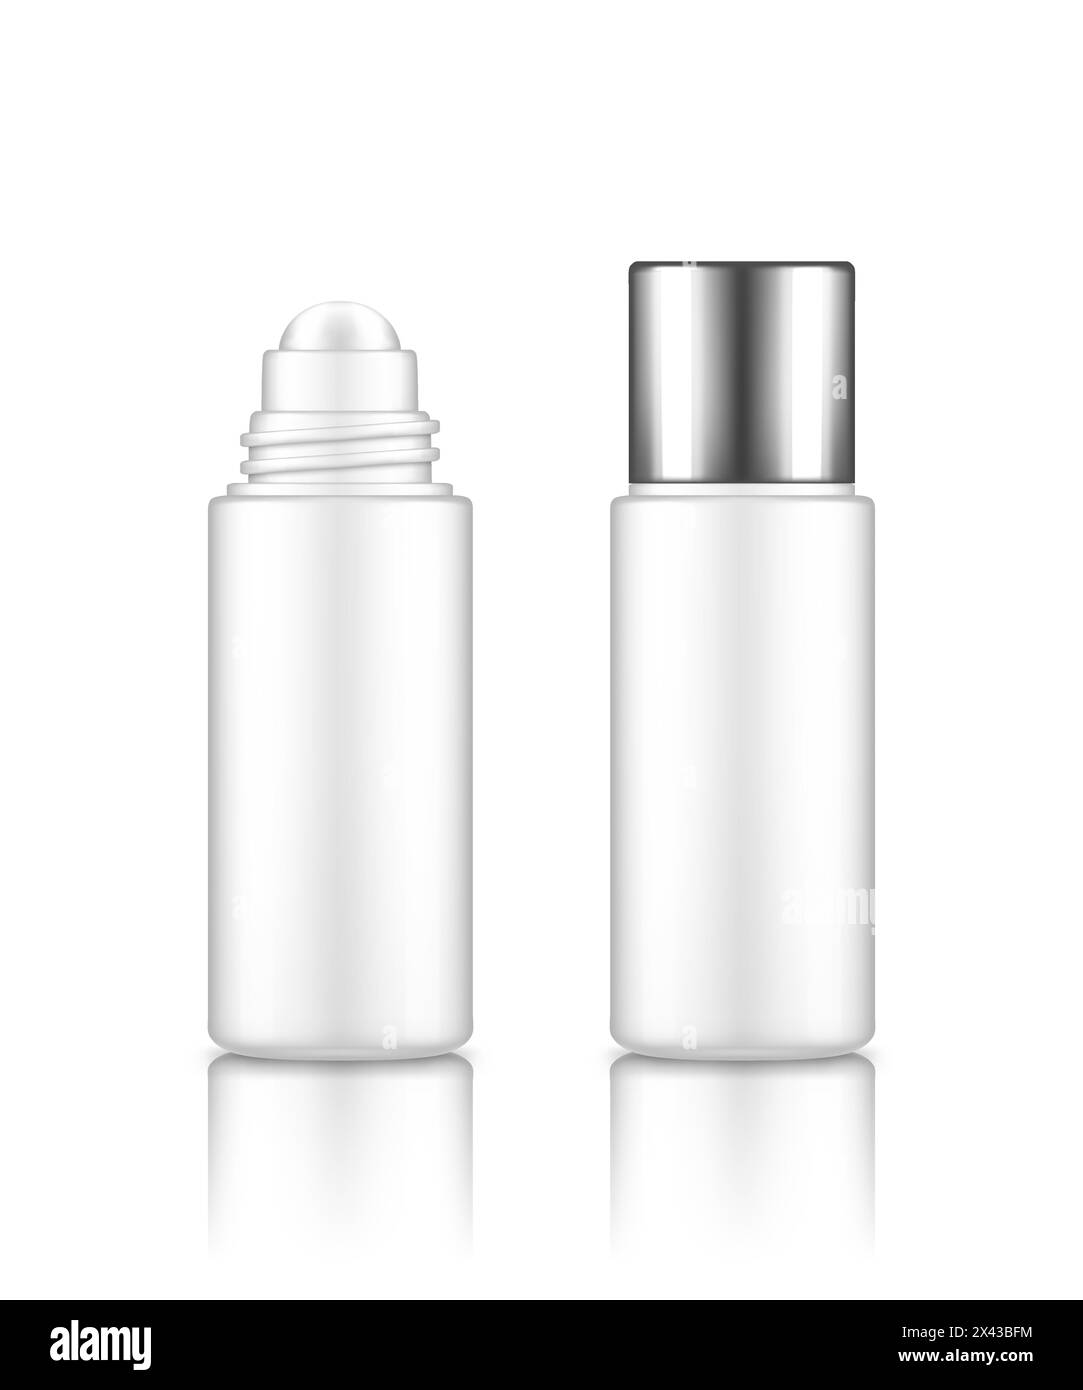 Lip, eye roller bottle with cream, serum, or essential oil for lifting, facial care and wrinkle prevent. Blank cosmetic product container mockup. Pack Stock Vector